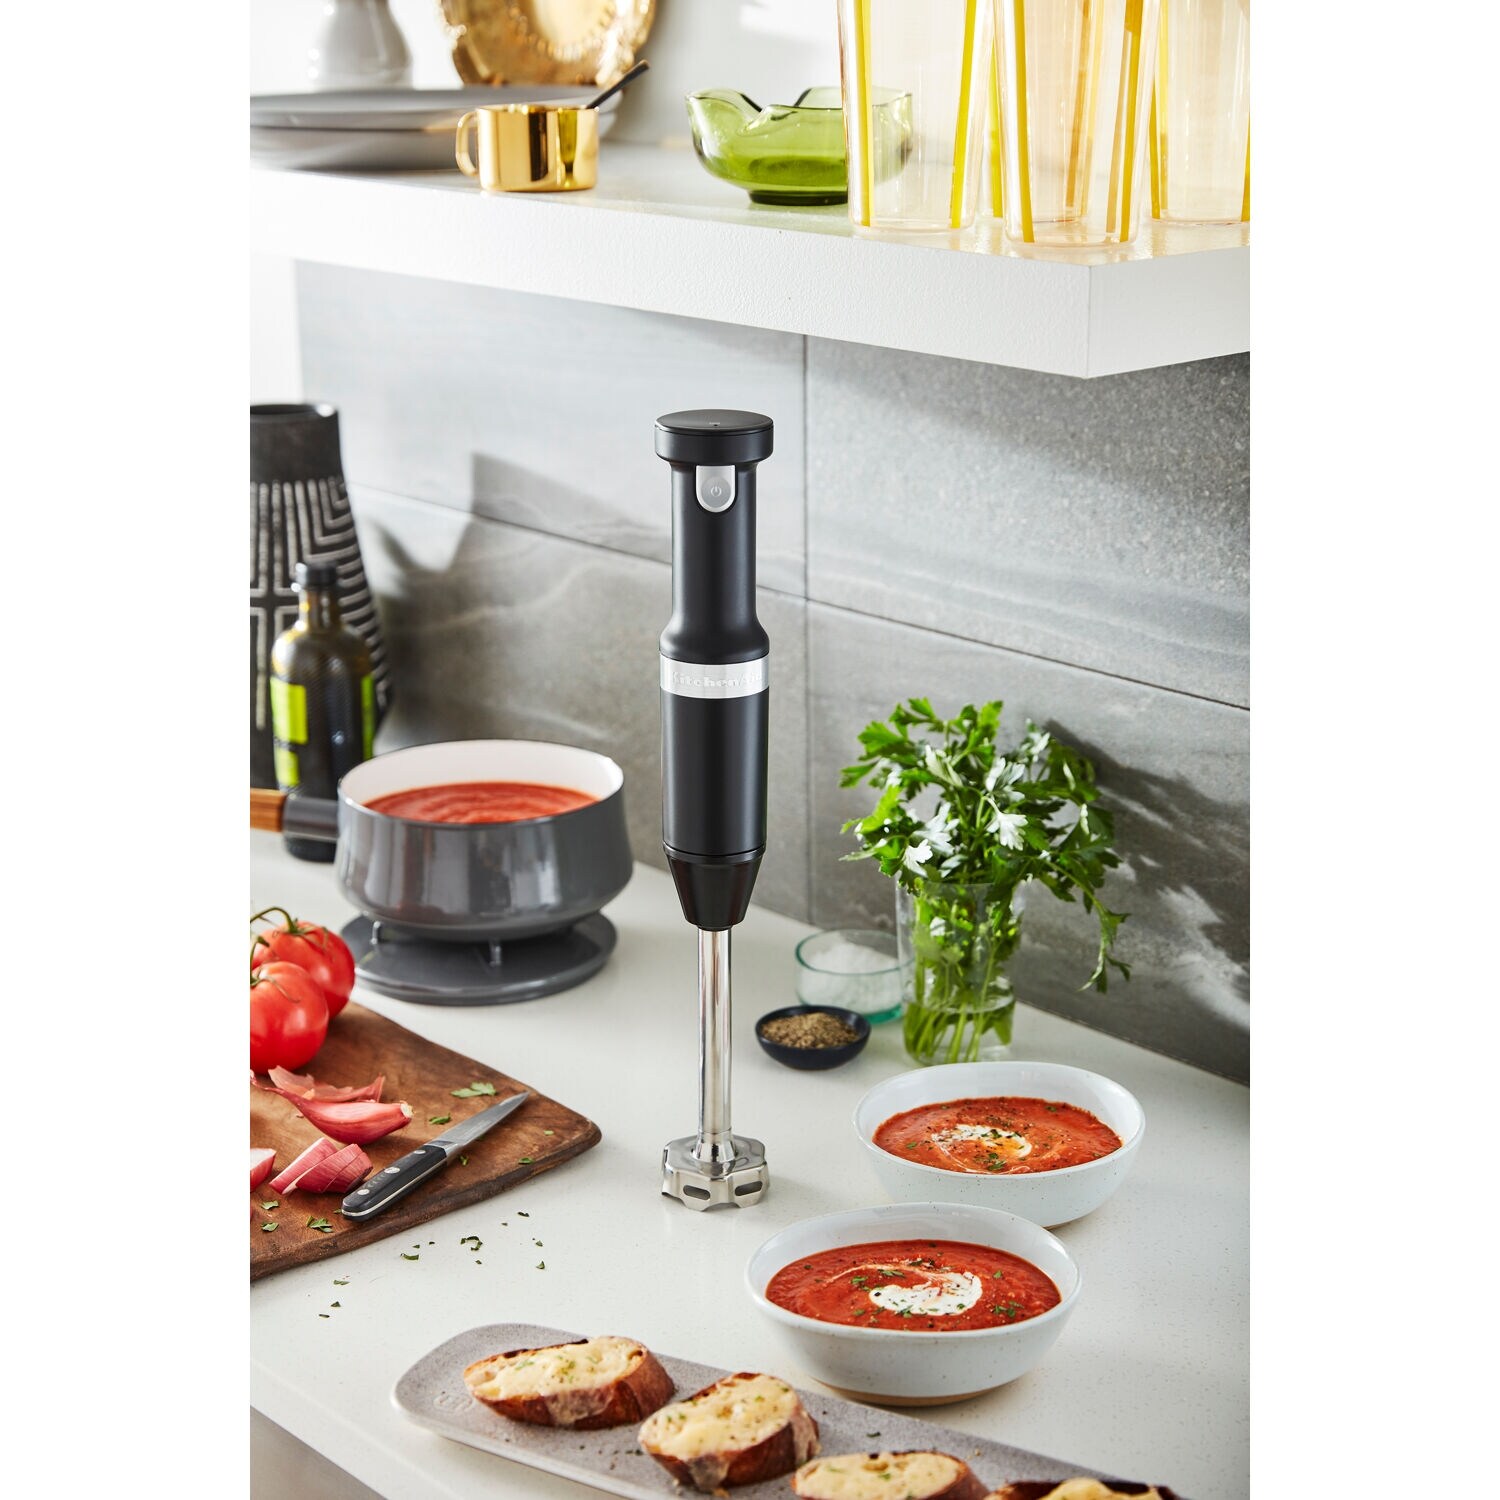 https://ak1.ostkcdn.com/images/products/is/images/direct/2e0db022b99d7a00ecb889d0cf39eccec3bd70d4/KitchenAid-Cordless-Variable-Speed-Immersion-Blender-in-Black-Matte-with-Blending-Jar.jpg